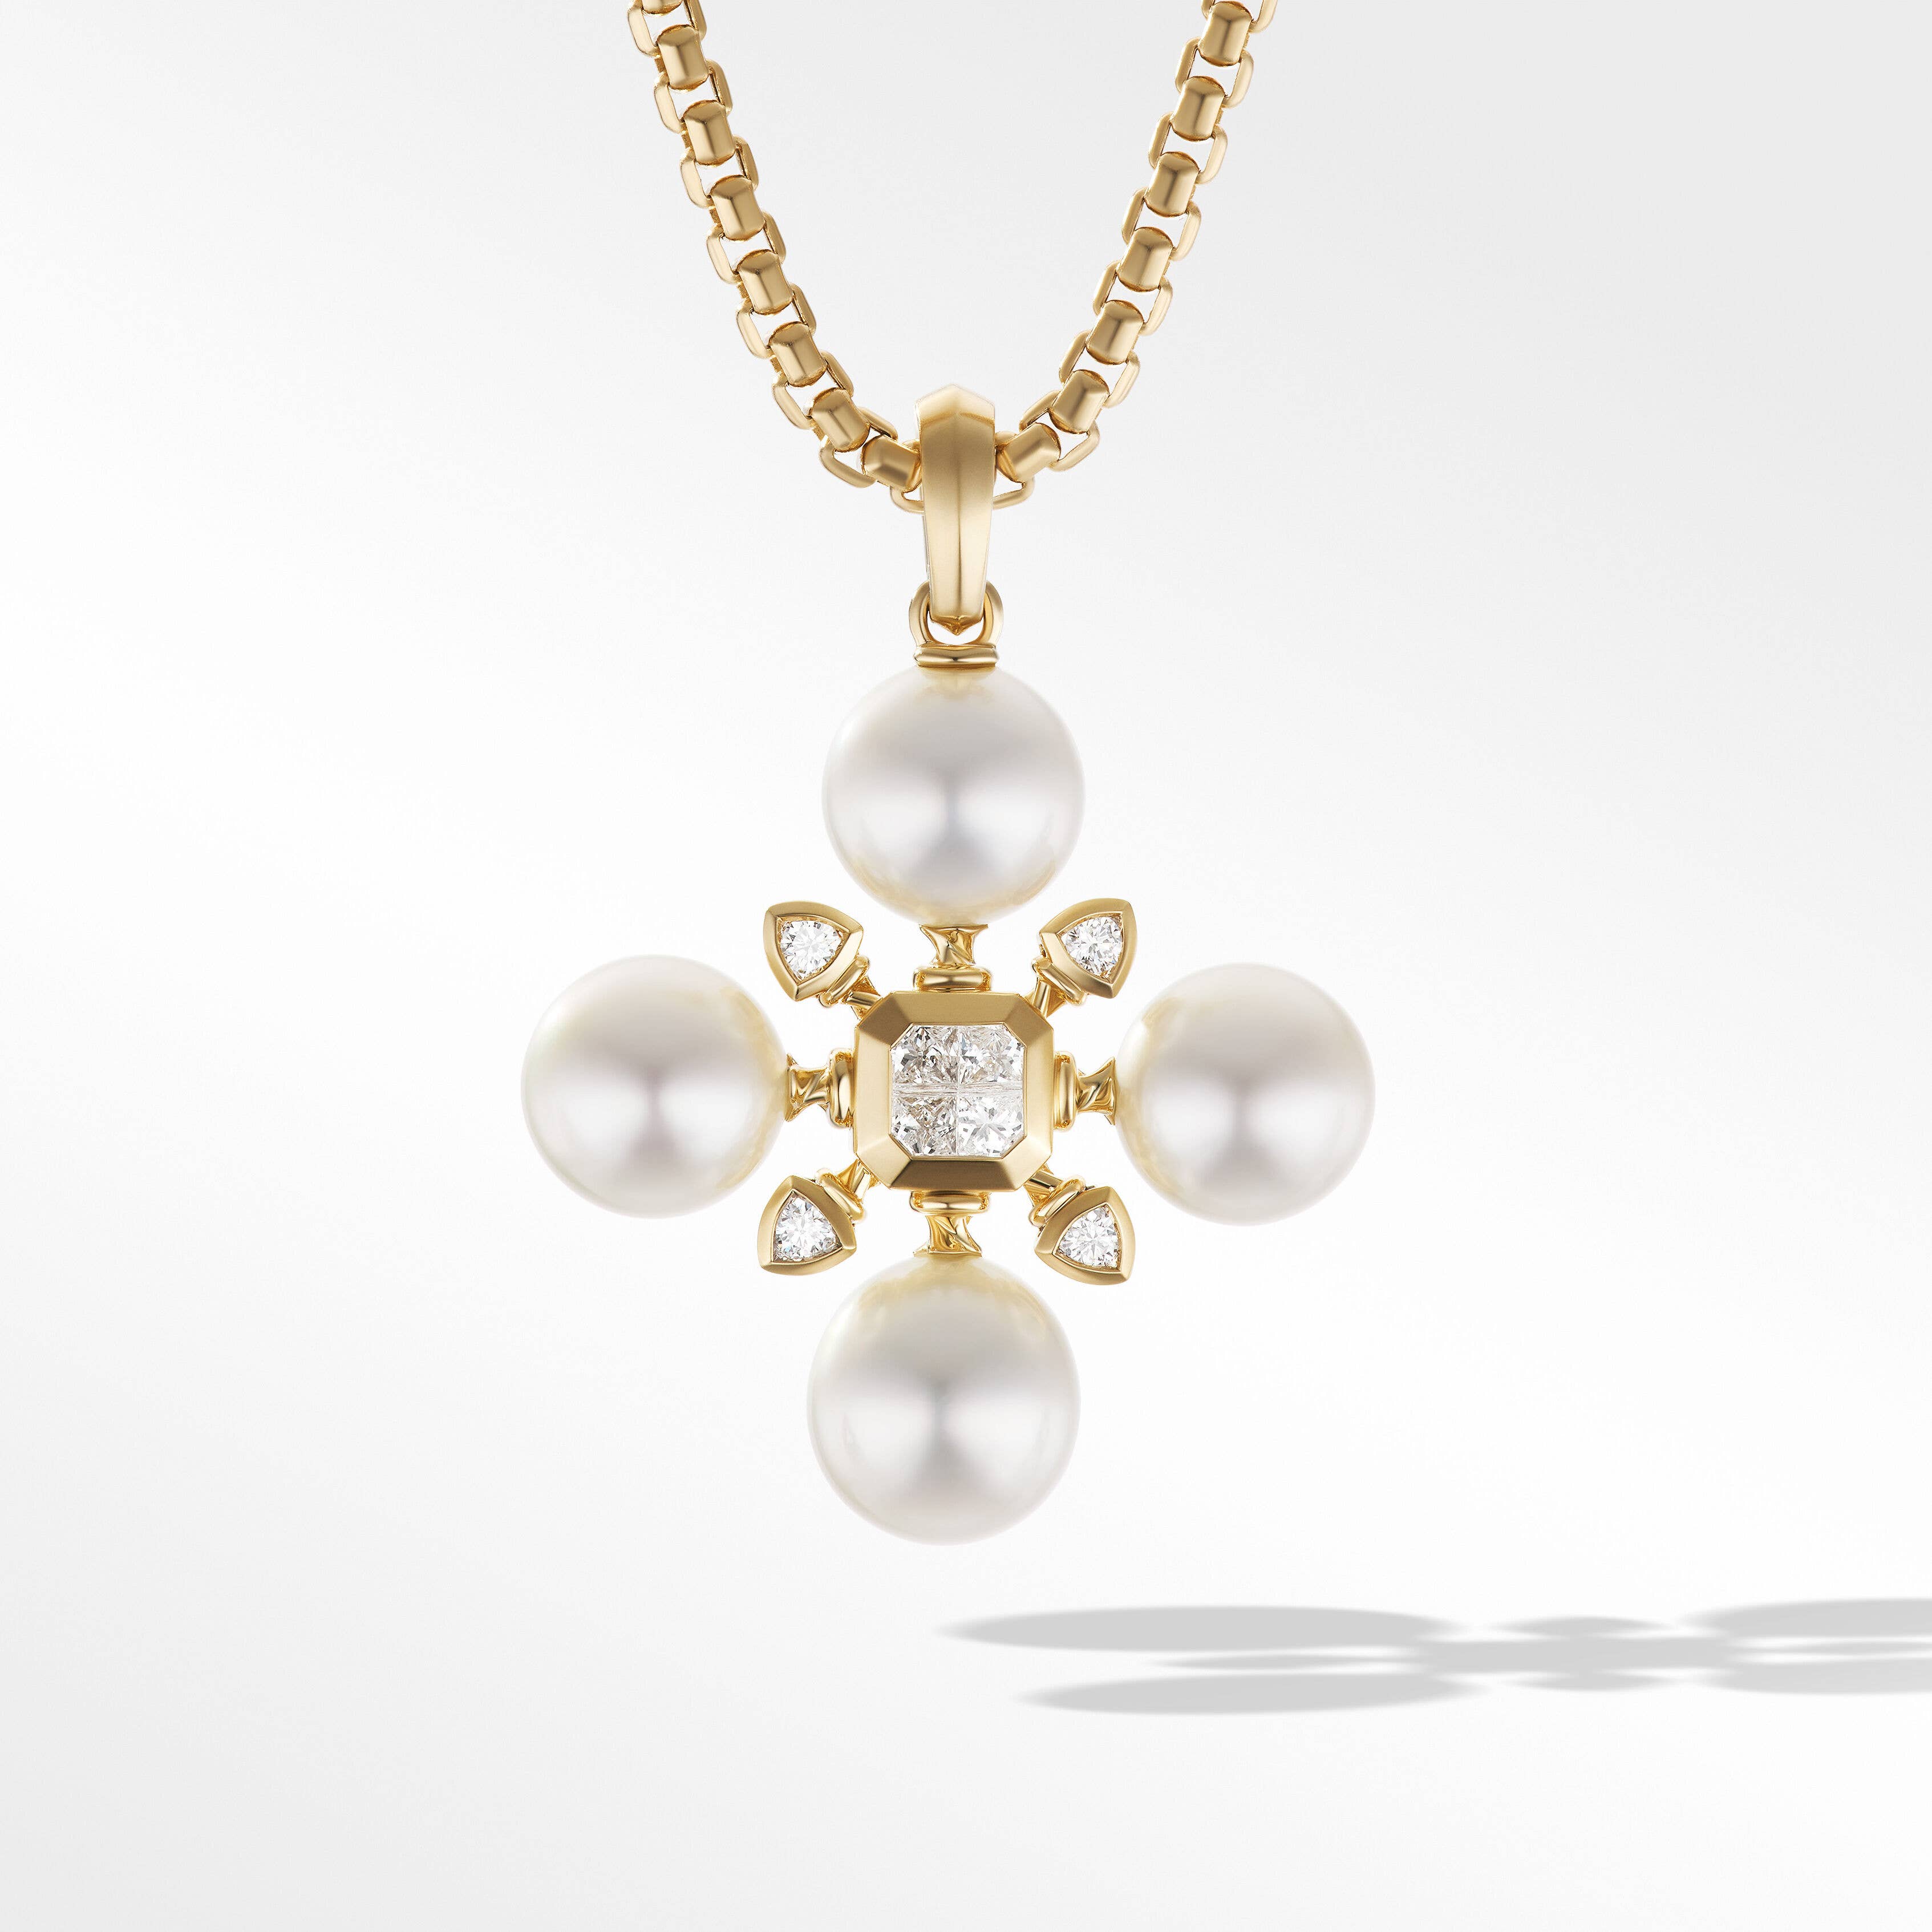 Renaissance Pearl Pendant with 18K Yellow Gold and Diamonds